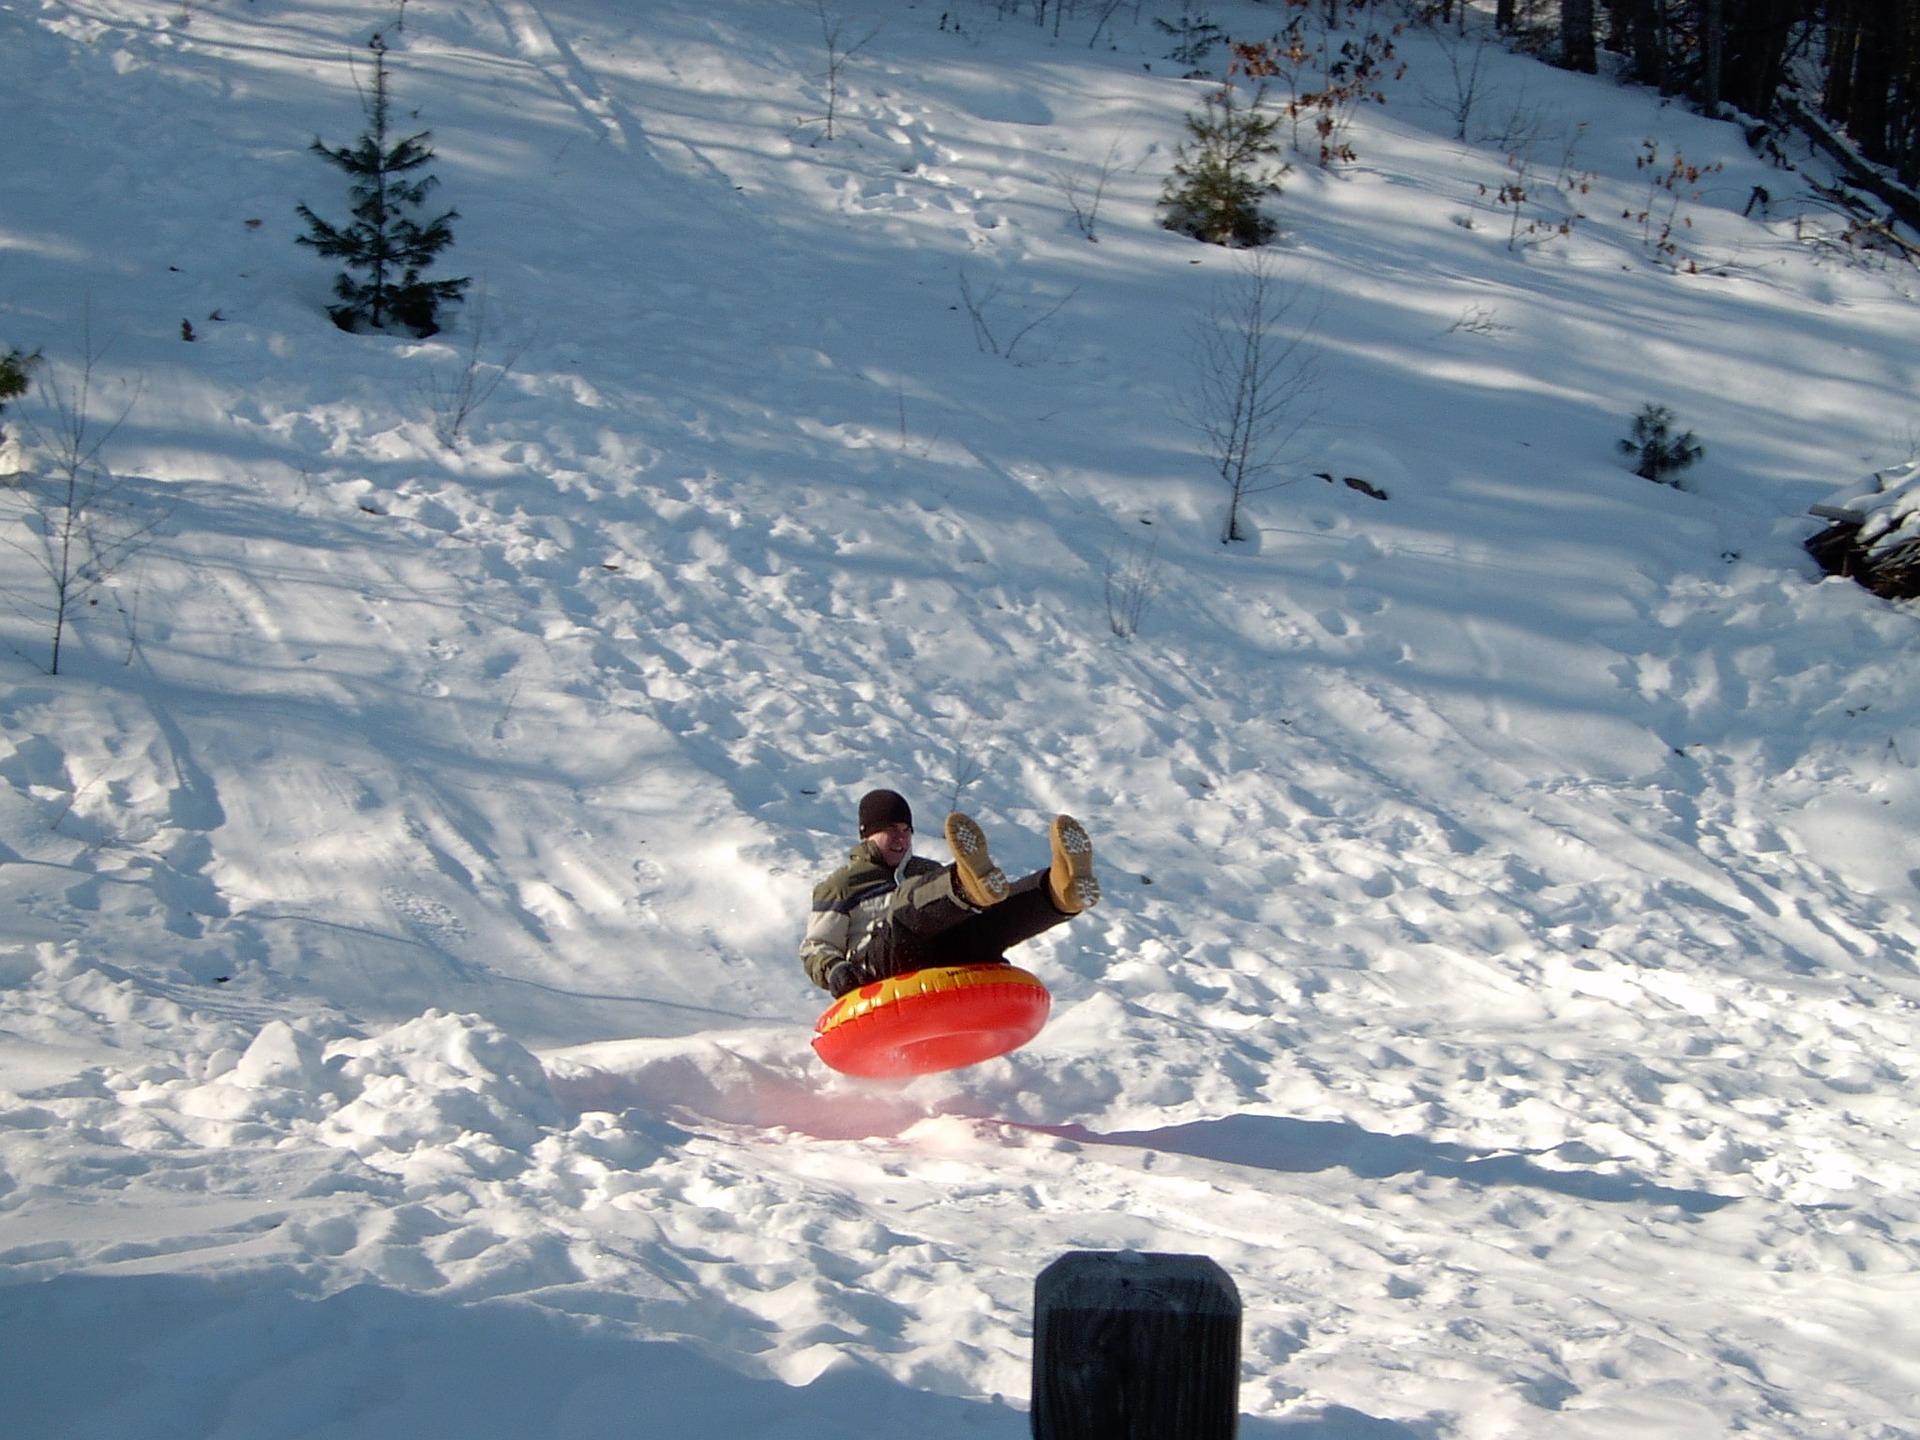 Enjoying tubing and more on your list of kid friendly Snowmass activities